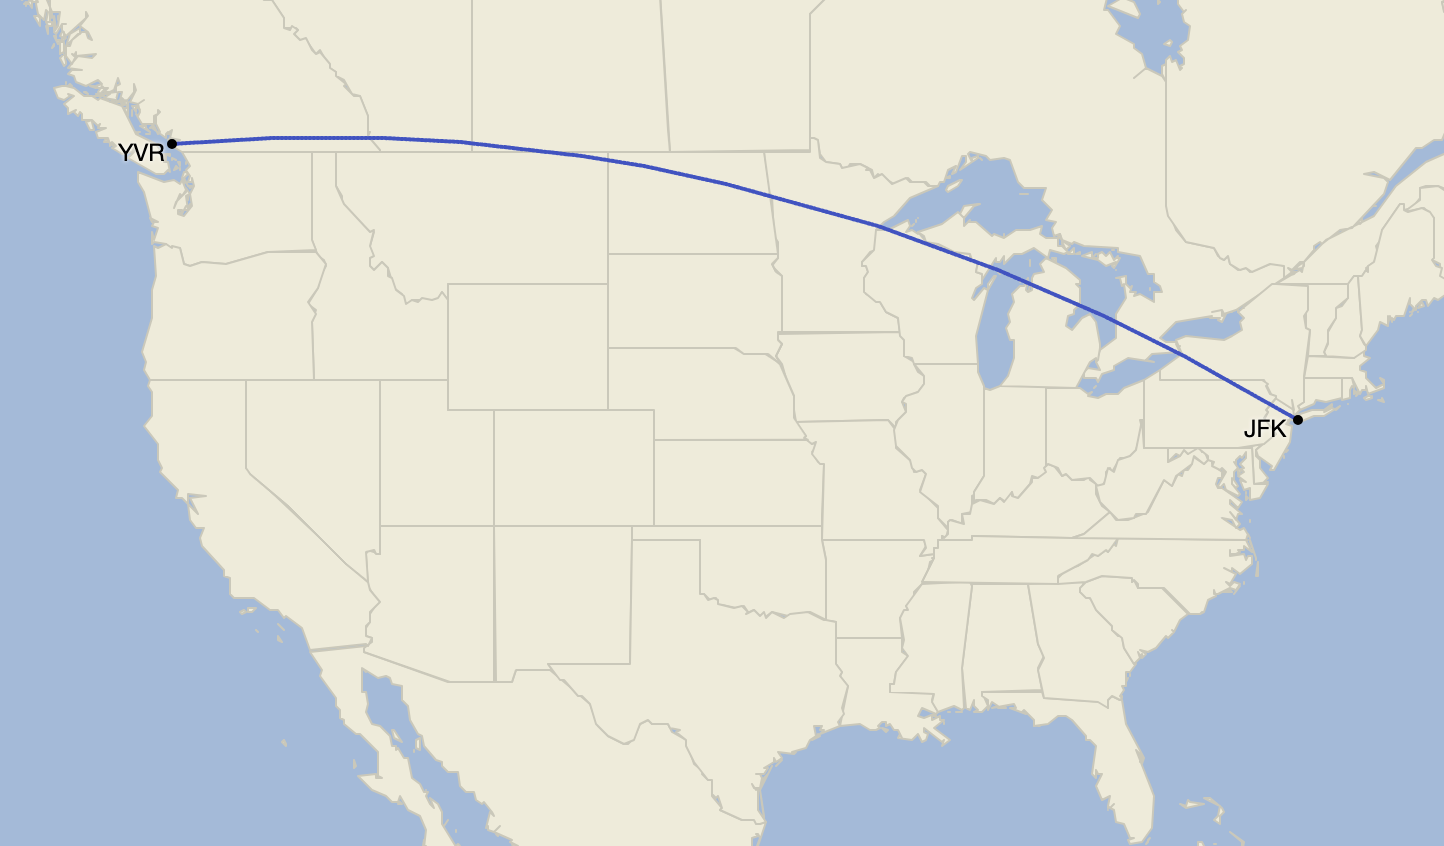 JFK-YVR route map. 